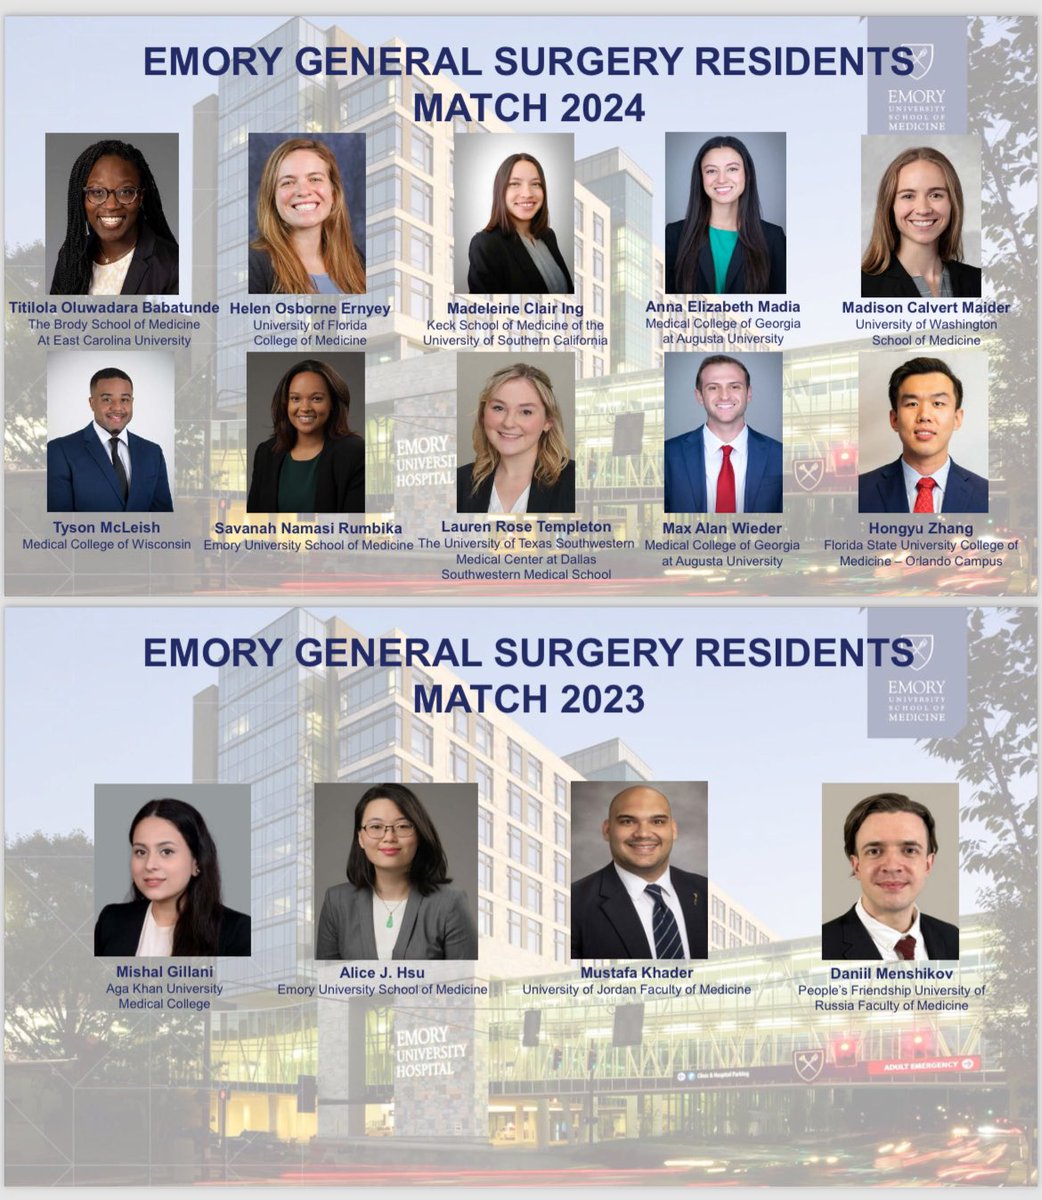 Welcome to the @EmorySurgery family!!!
What a dream team 🙌🏾🍾👏🏾👏🏾